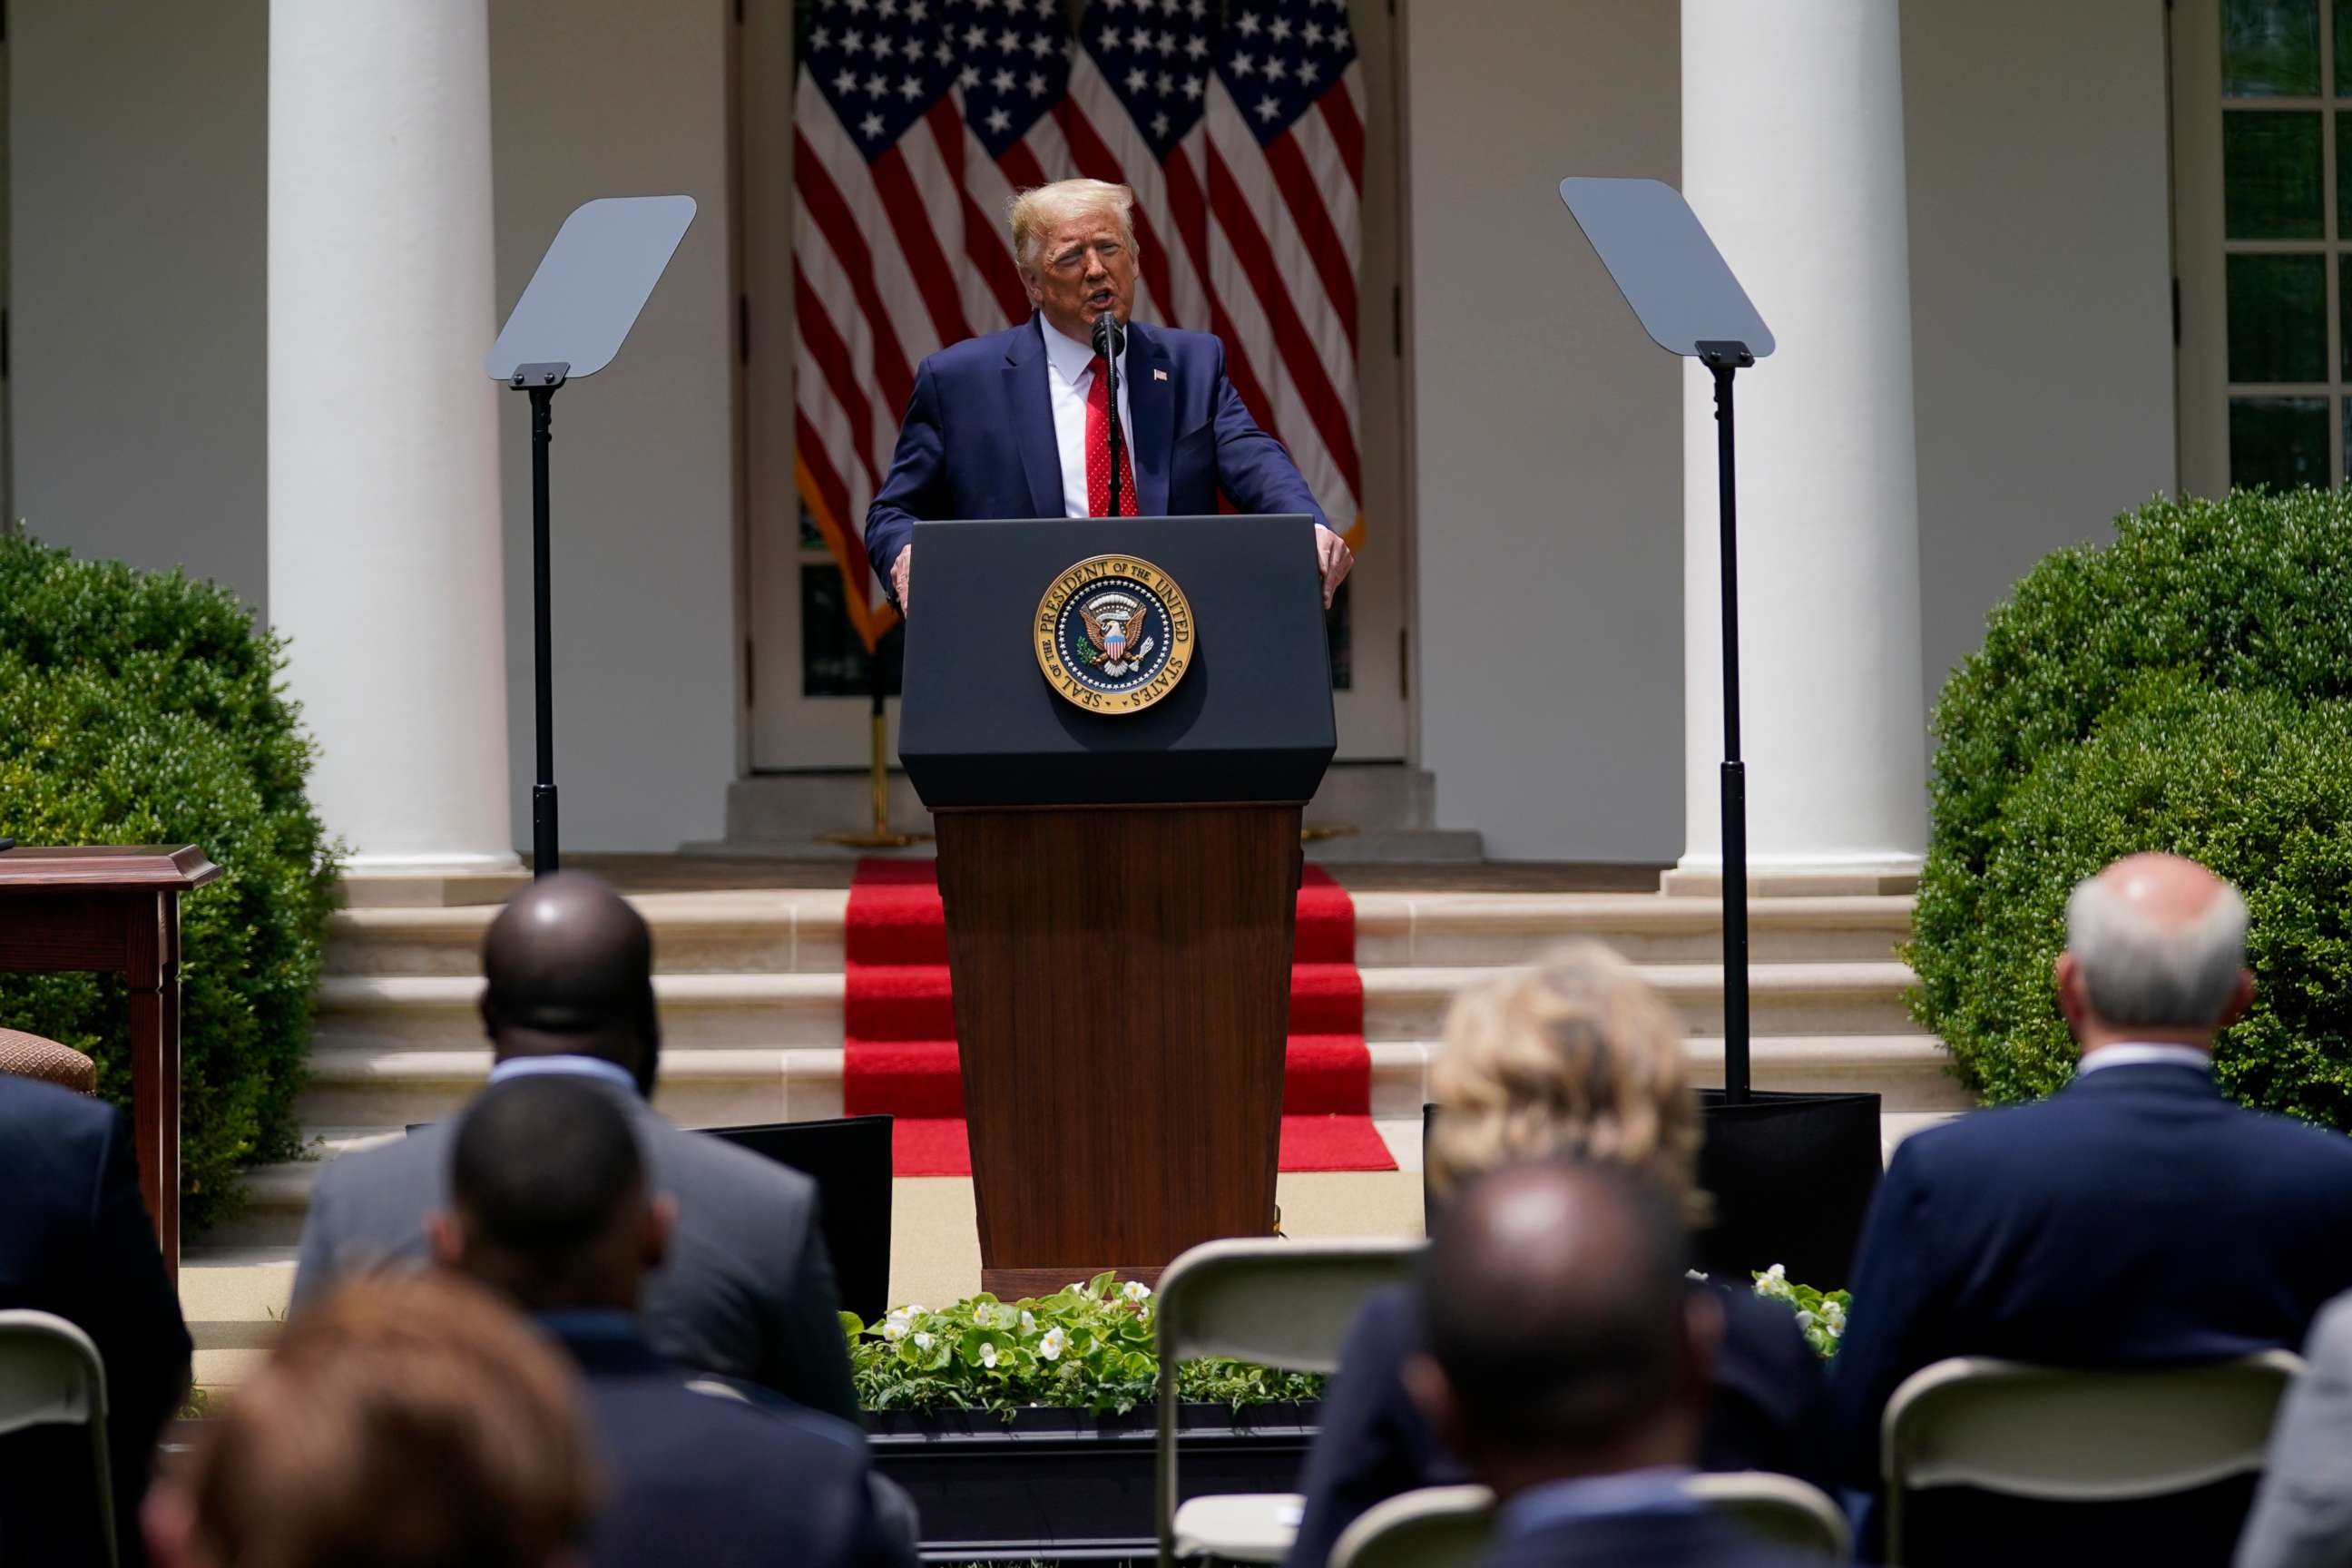 PHOTO: President Donald Trump speaks during an event on police reform, in the Rose Garden of the White House, June 16, 2020, in Washington.